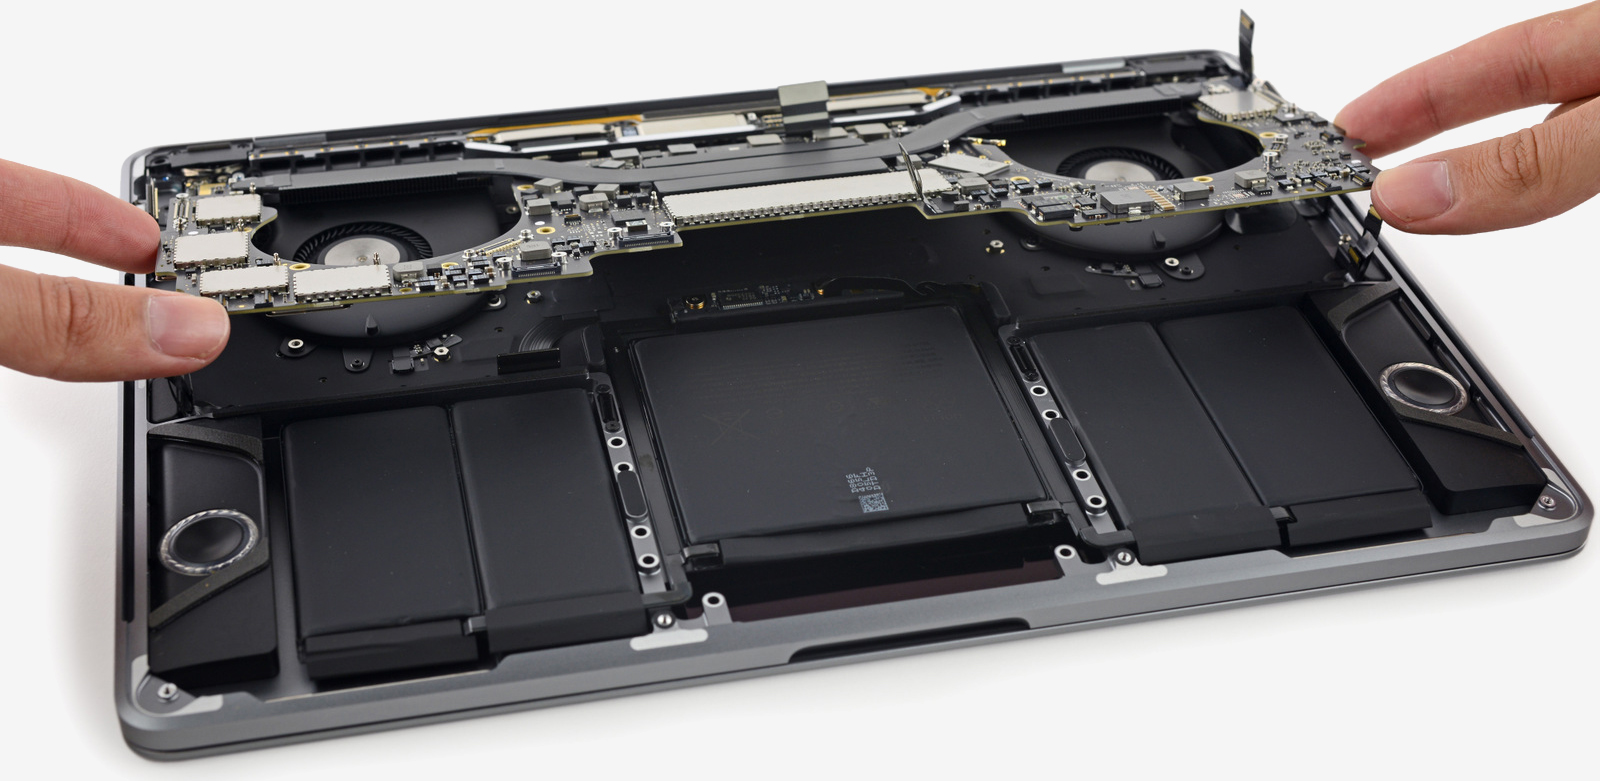 Teardown of 13-inch MacBook Pro with Touch Bar reveals fake speaker grills, fragile Touch Bar